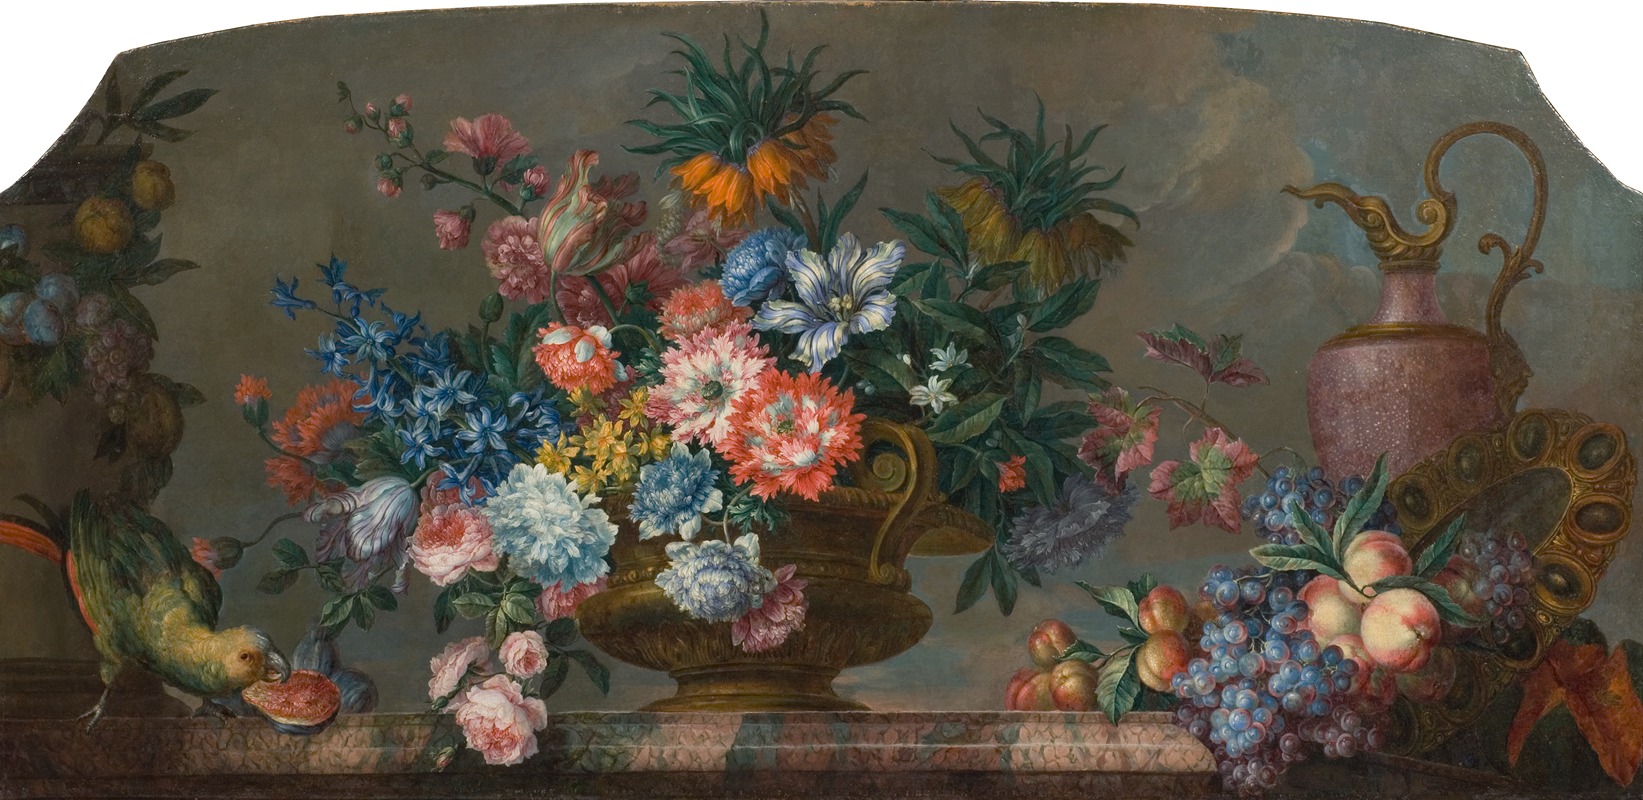 Antoine Monnoyer - Flowerpiece with Vases and a Parrot